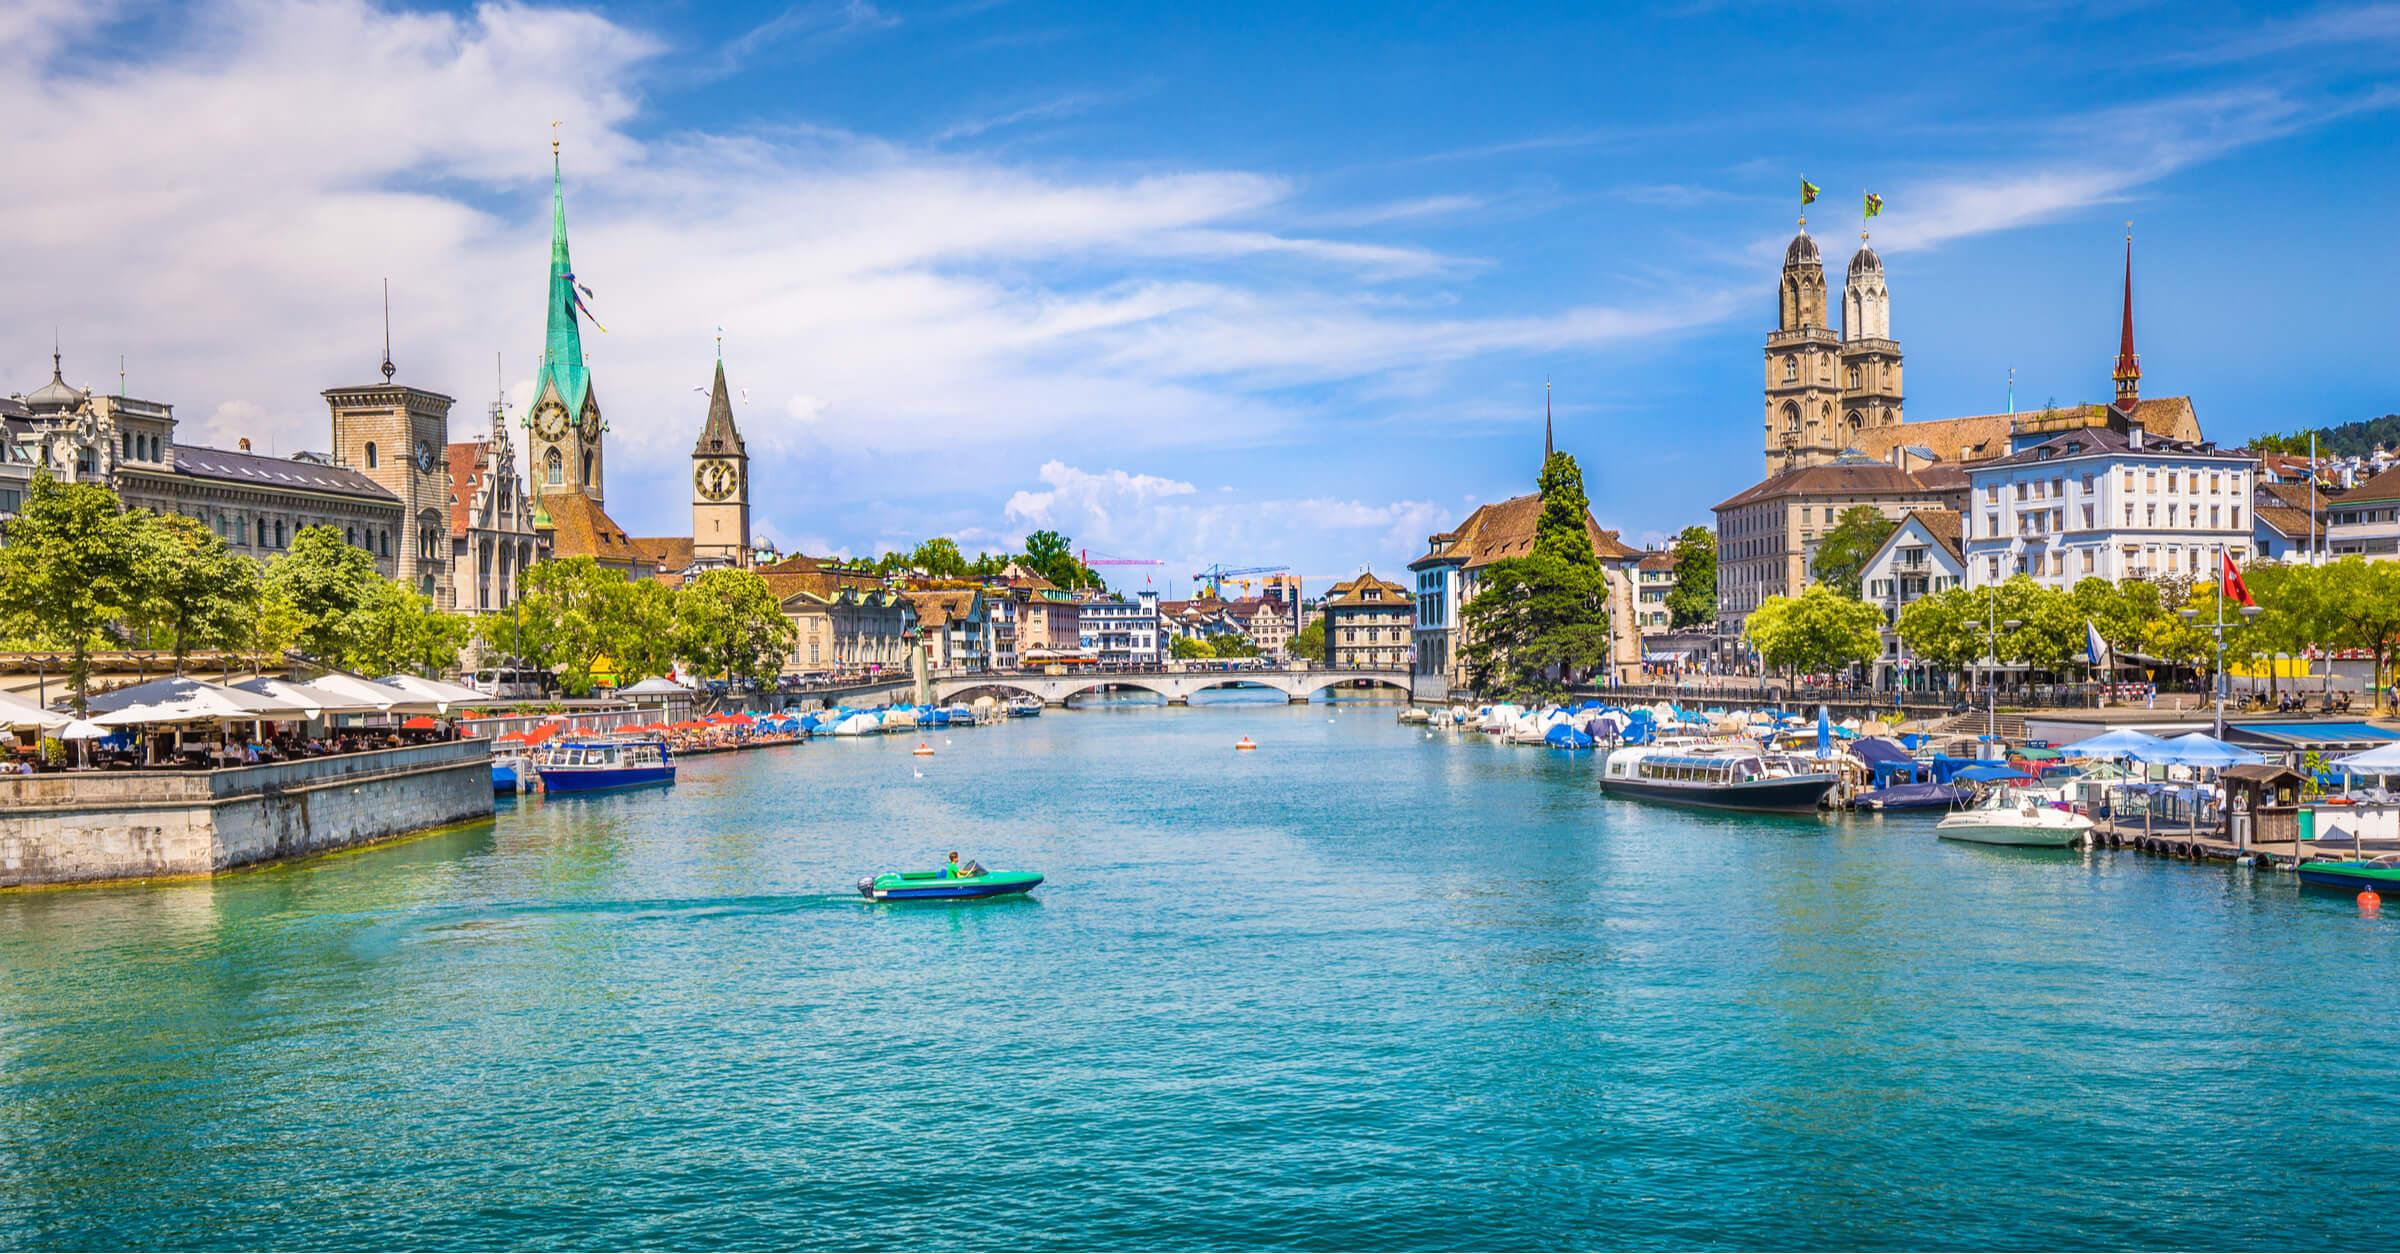 Zurich: One Of The Best Cities To Live And Work